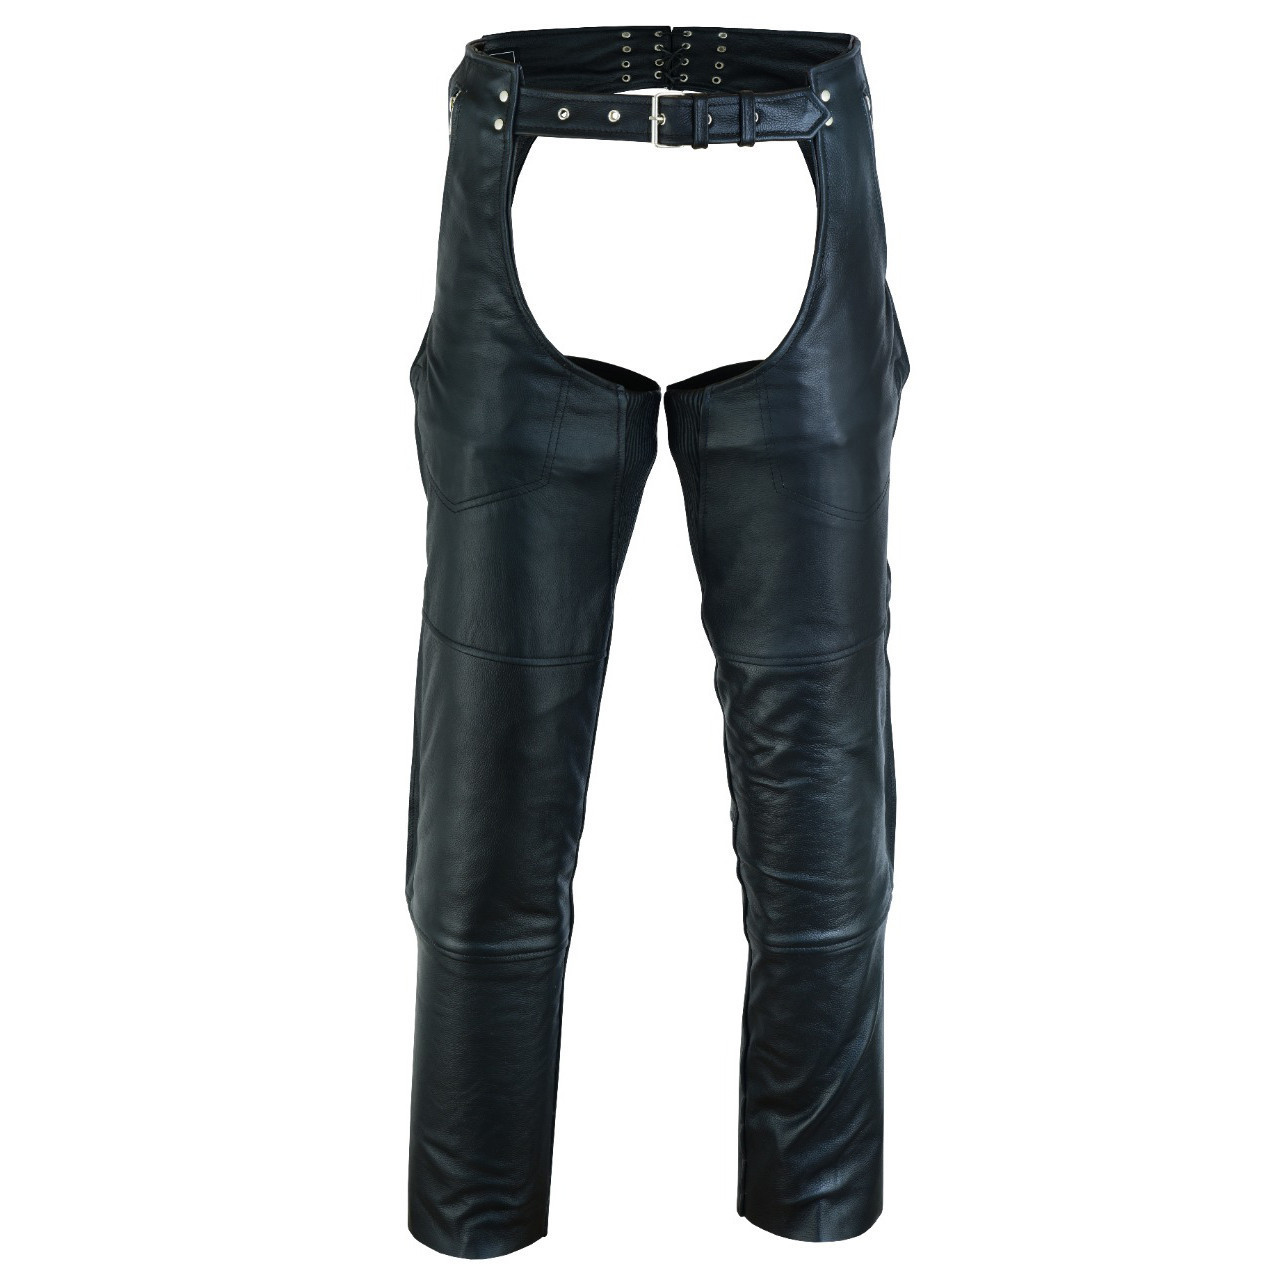 10 Best Motorcycle Riding Chaps - Team Motorcycle